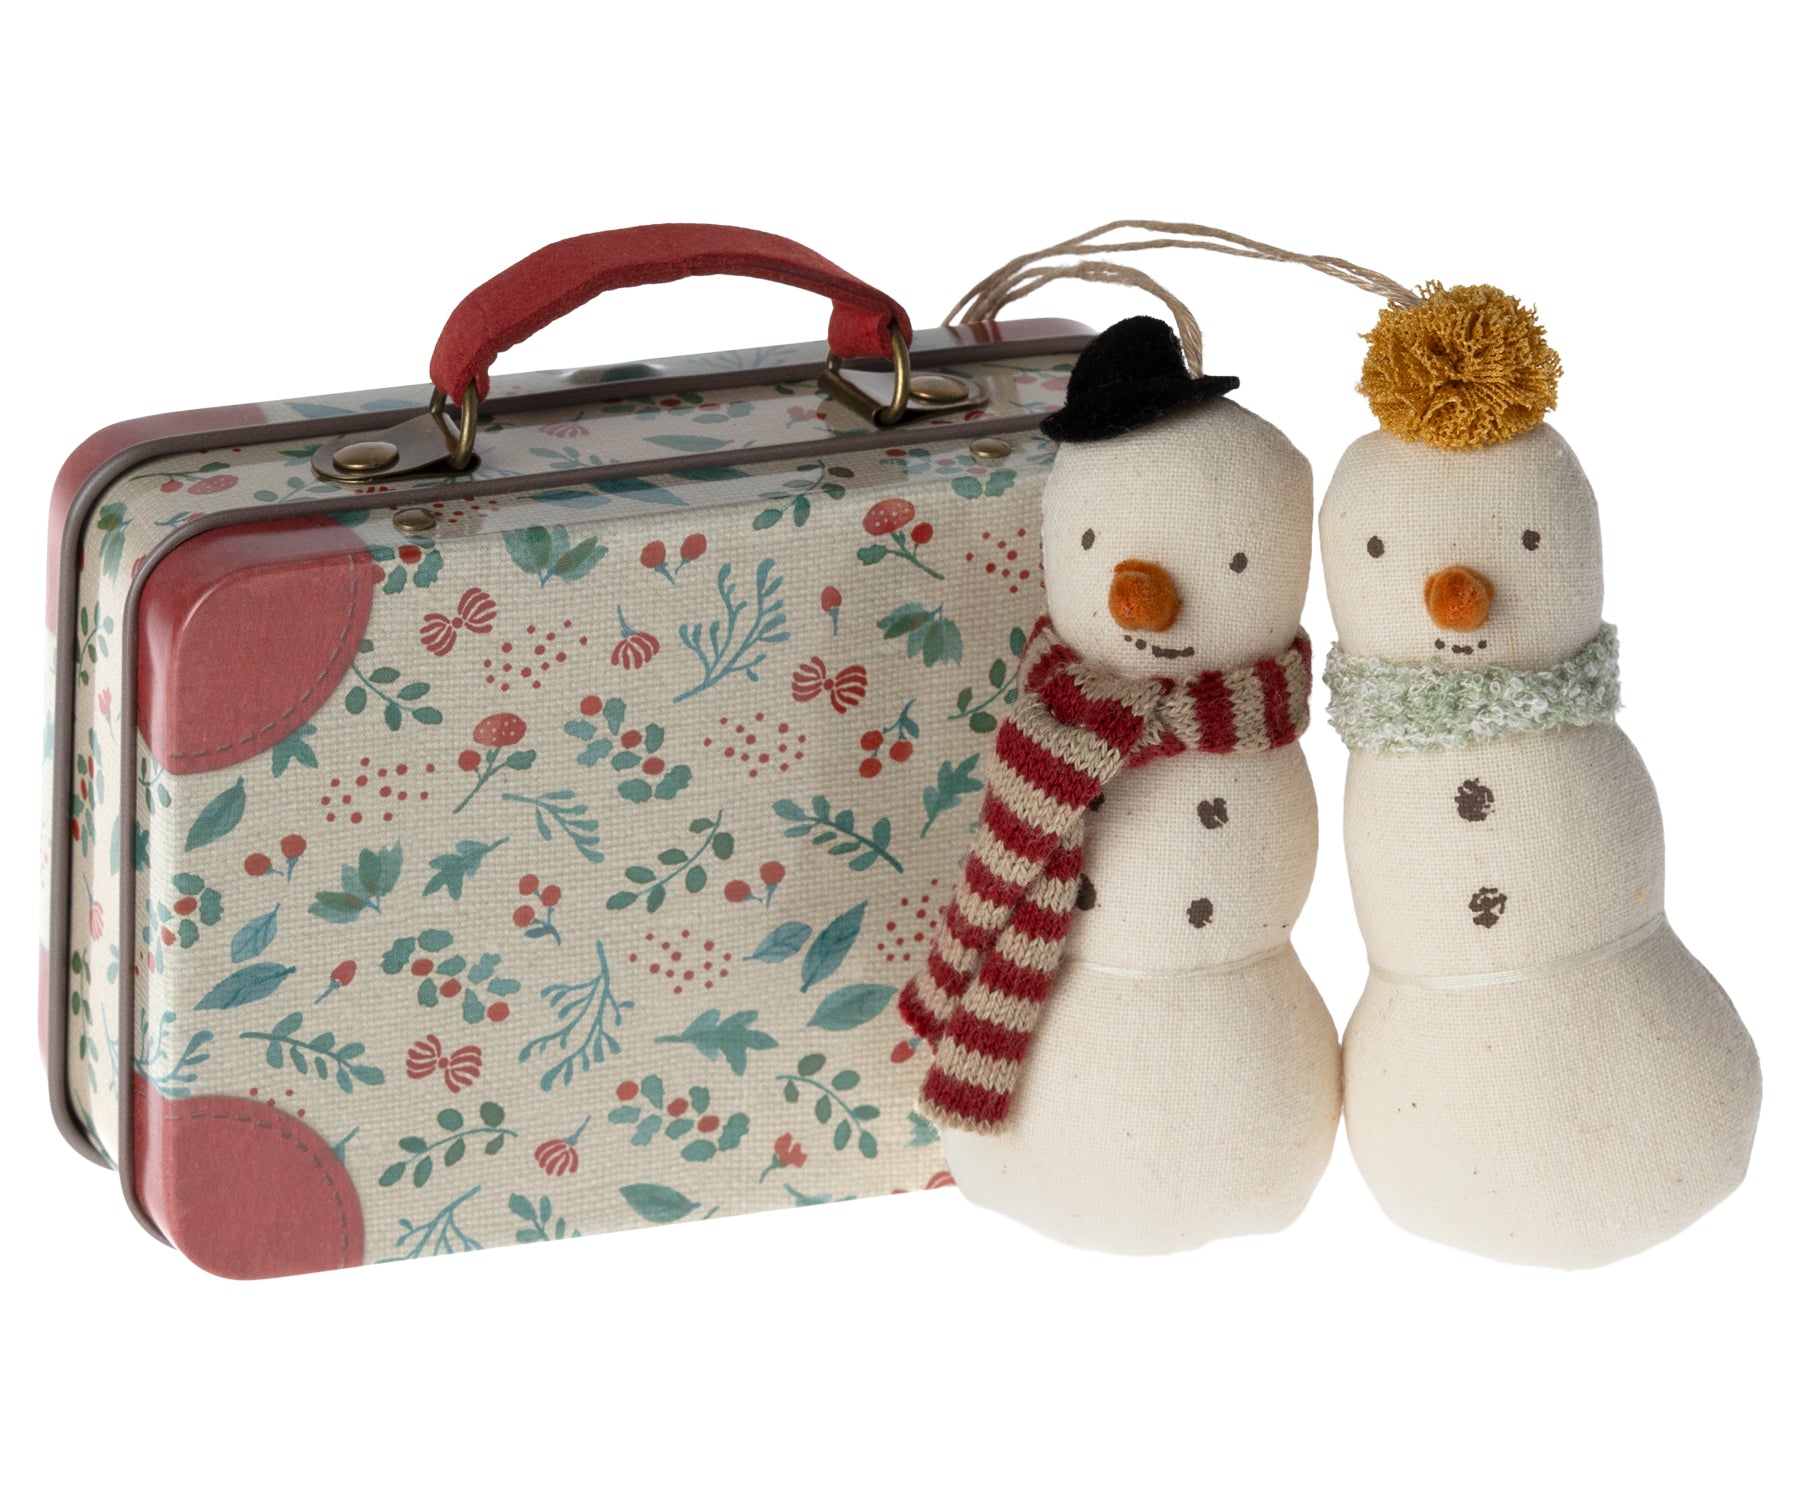 Maileg Snowman Ornaments In Metal Suitcase